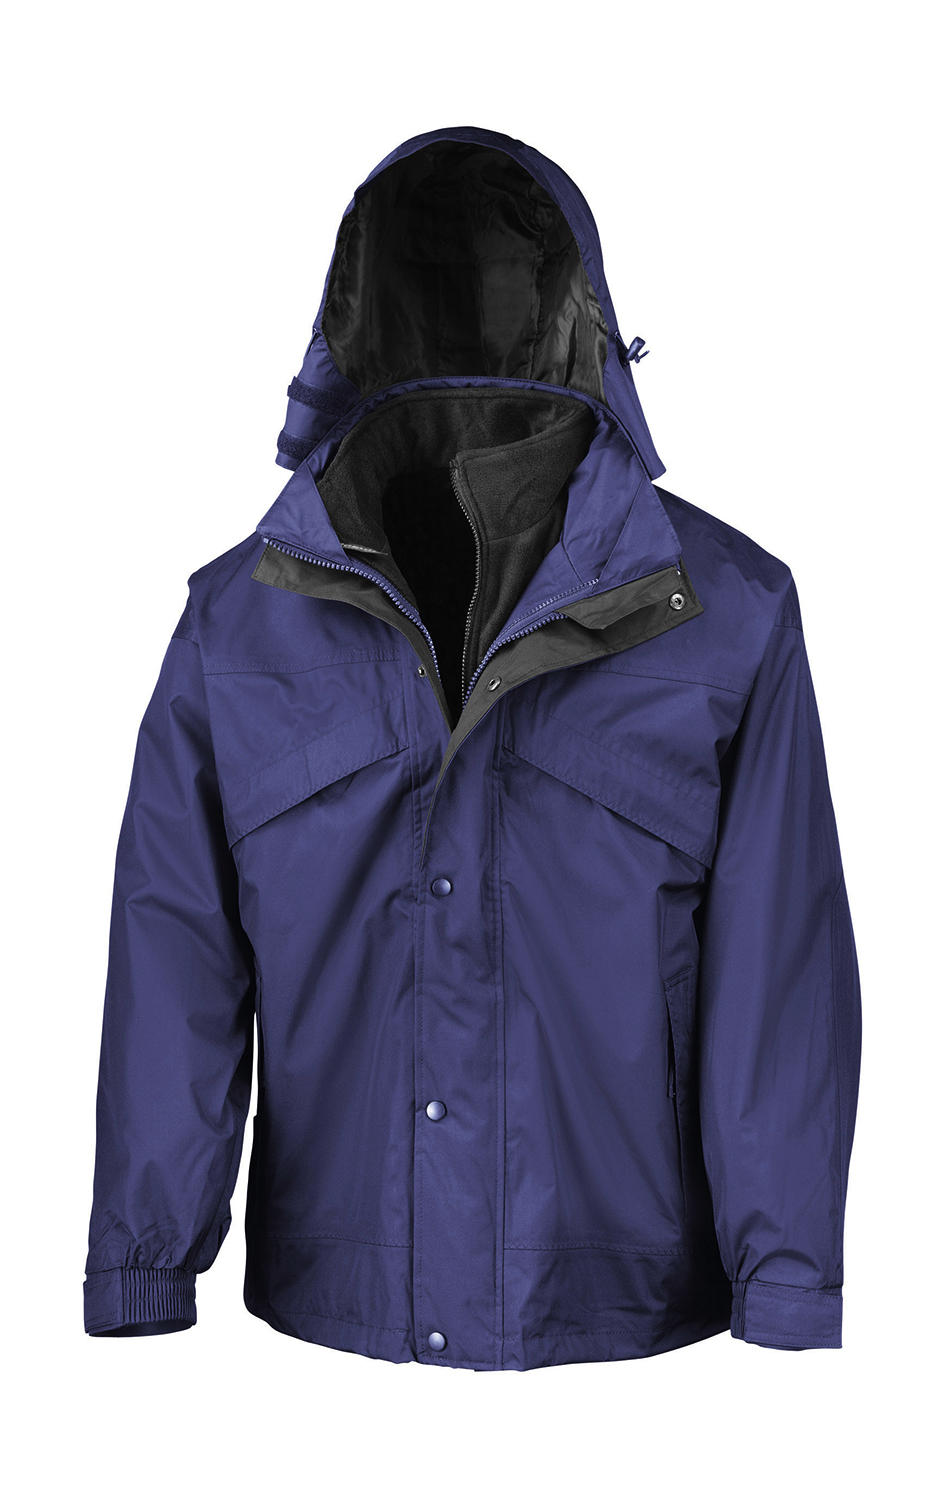  3-in-1 Jacket with Fleece in Farbe Royal